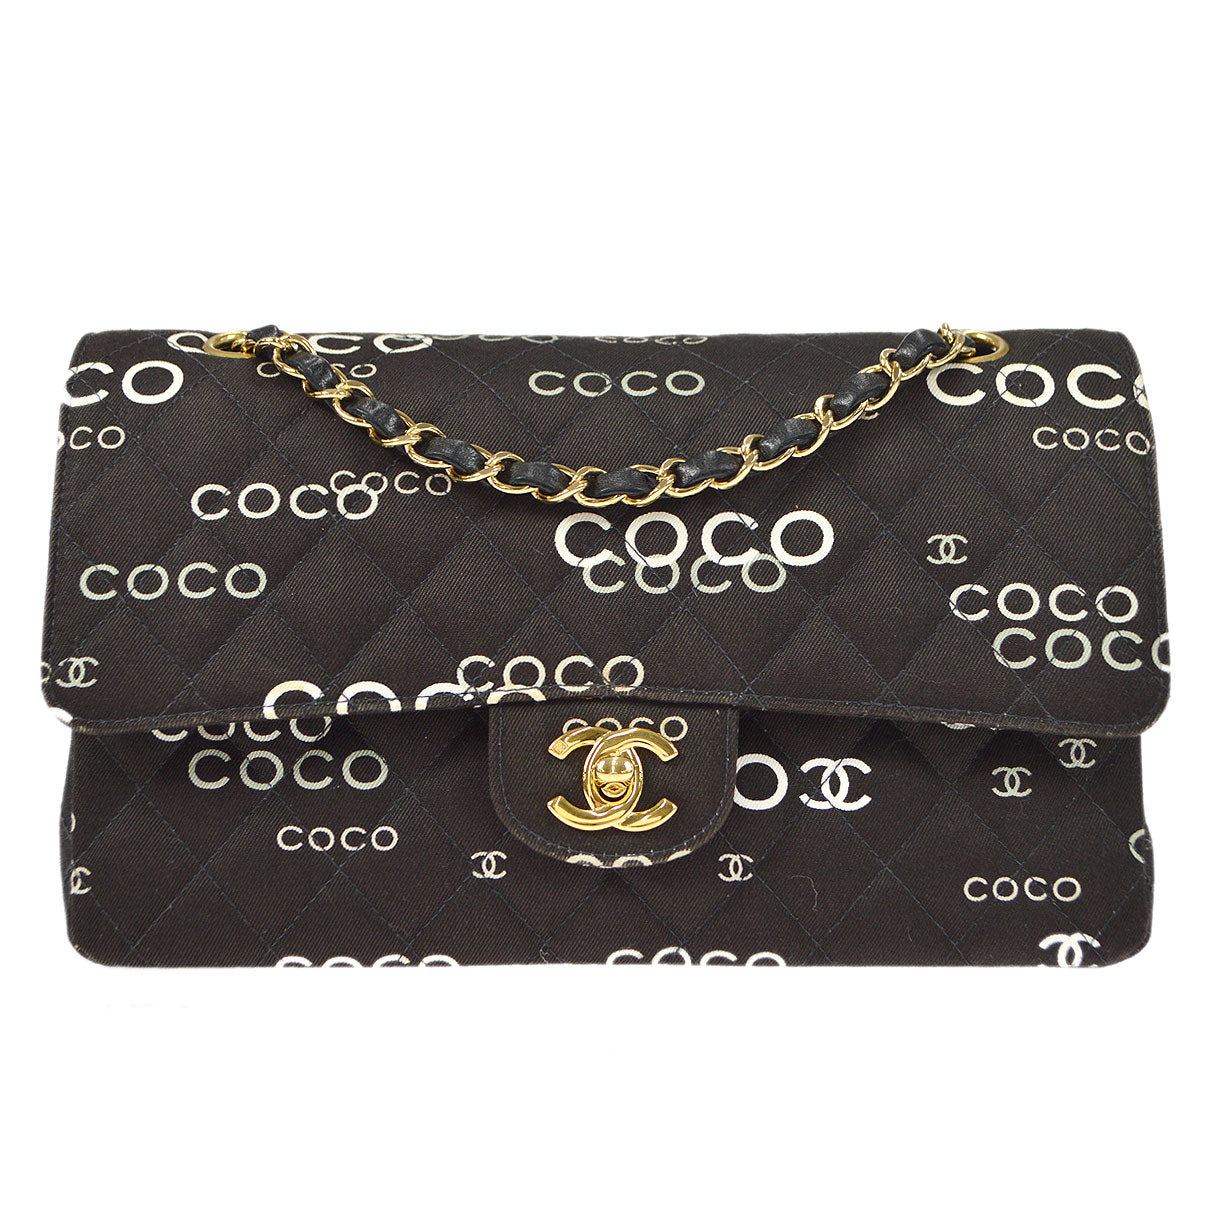 Chanel 2001-2003 COCO patterned Classic Double Flap Medium Black Canvas